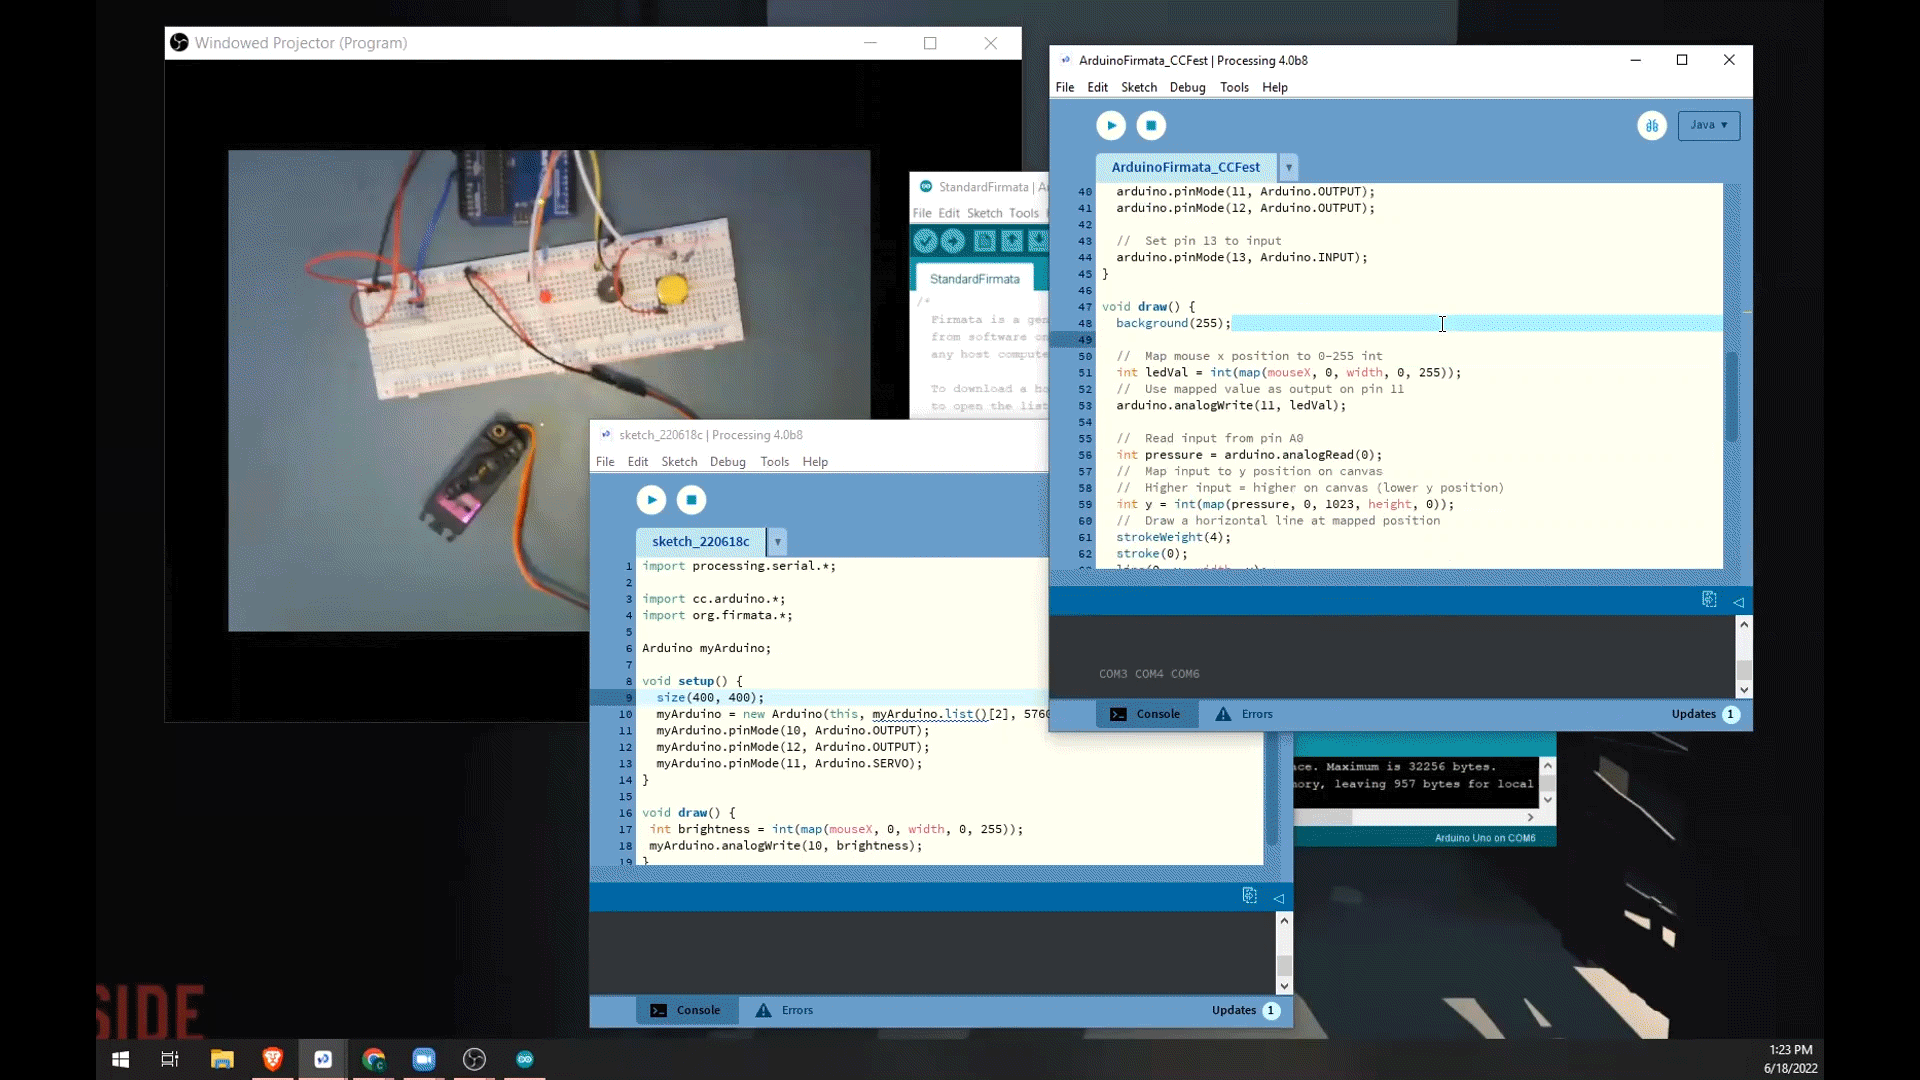 Gif of Caleb Foss’s workshop using Processing and Arduino. Depiction of processing script communicating with Arduino to turn on and off a led light on a breadboard.